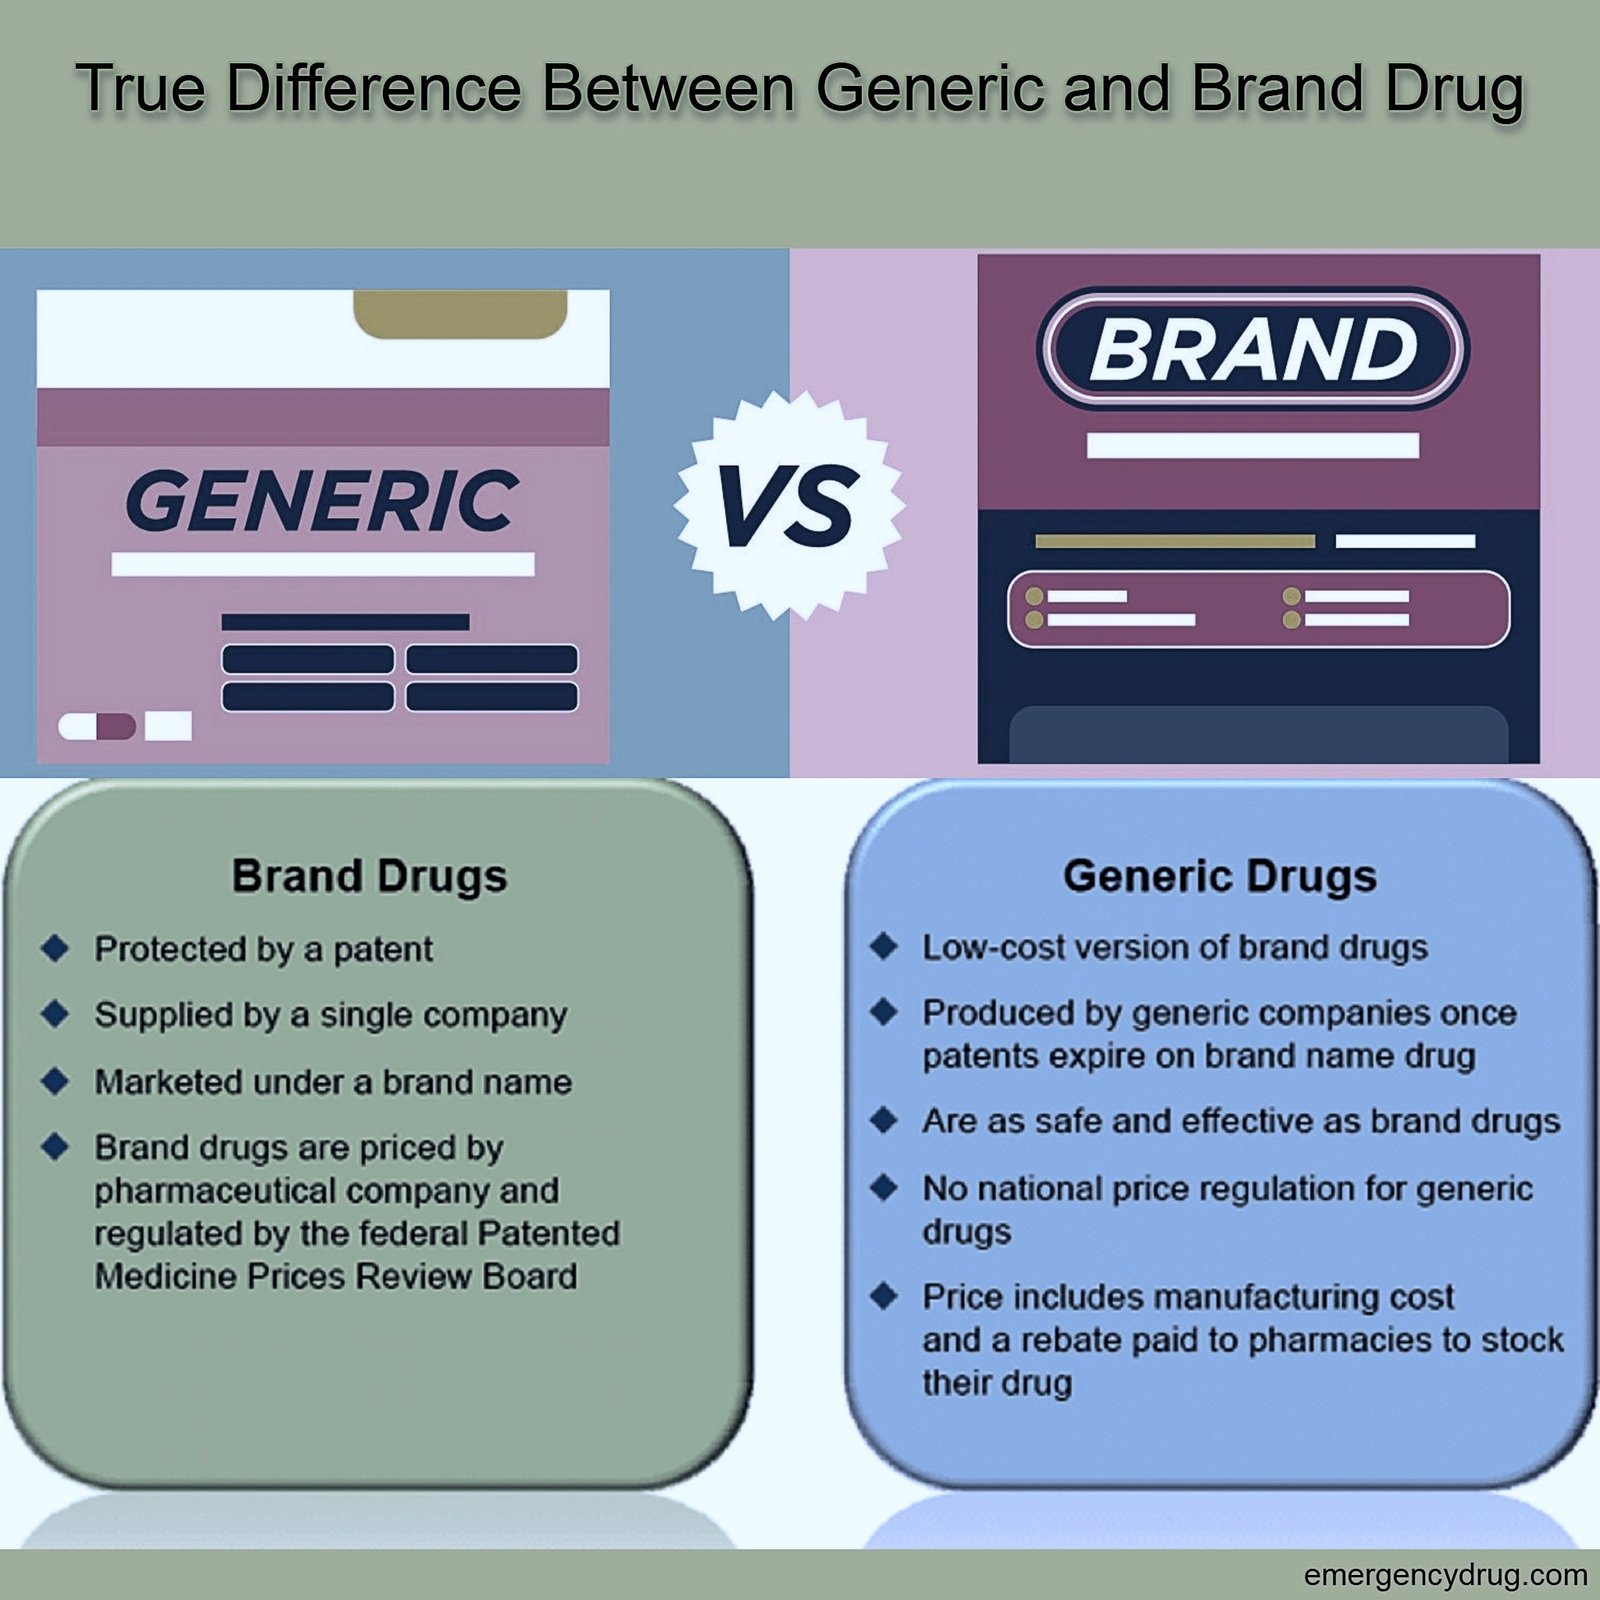 What's In A Name? Brand Name vs. Generic